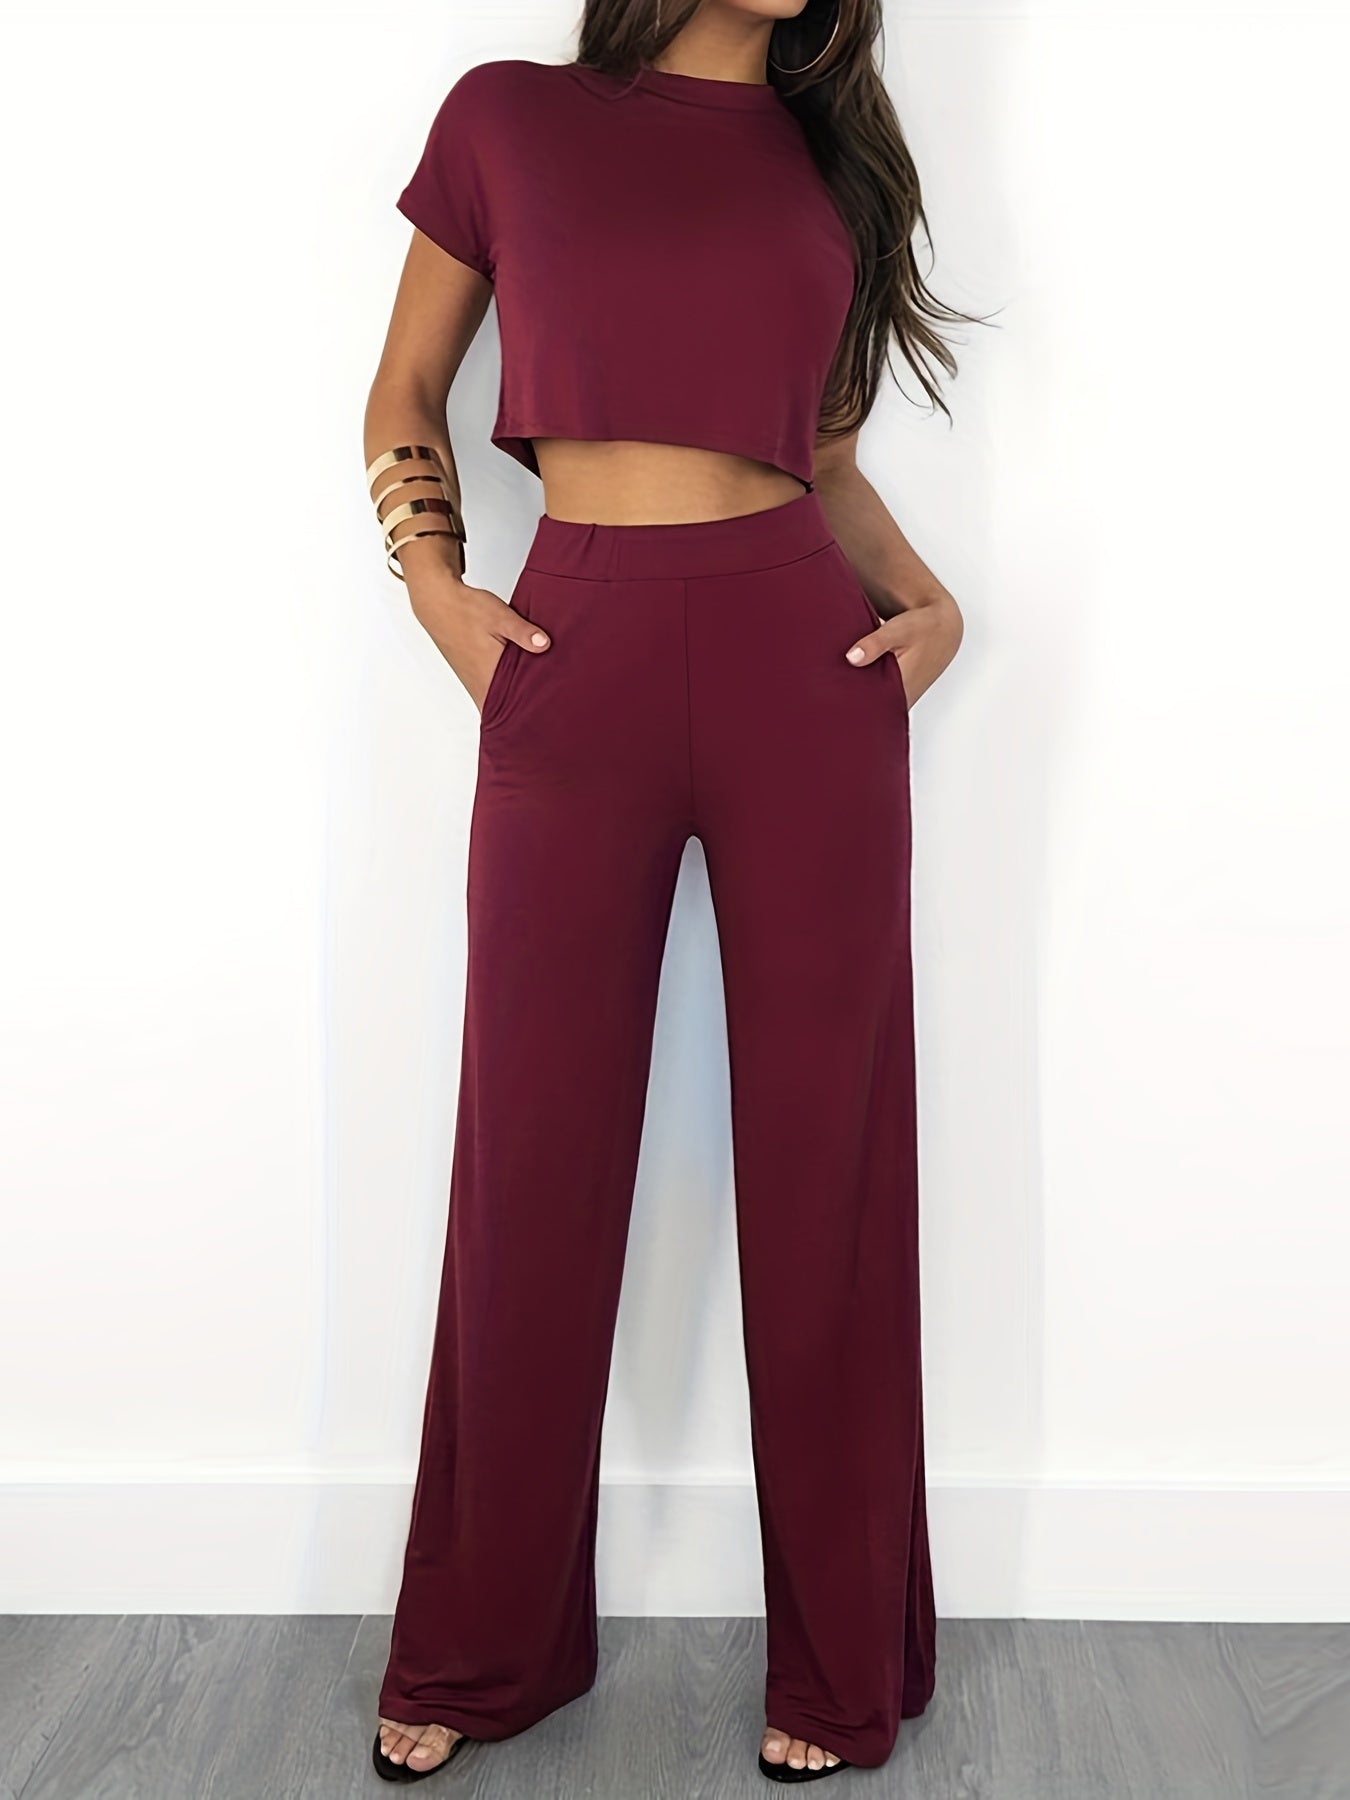 Antmvs Casual Solid Two-piece Set, Crew Neck Short Sleeve Cropped T-shirt & High Waist Wide Leg Pants Outfits, Women's Clothing